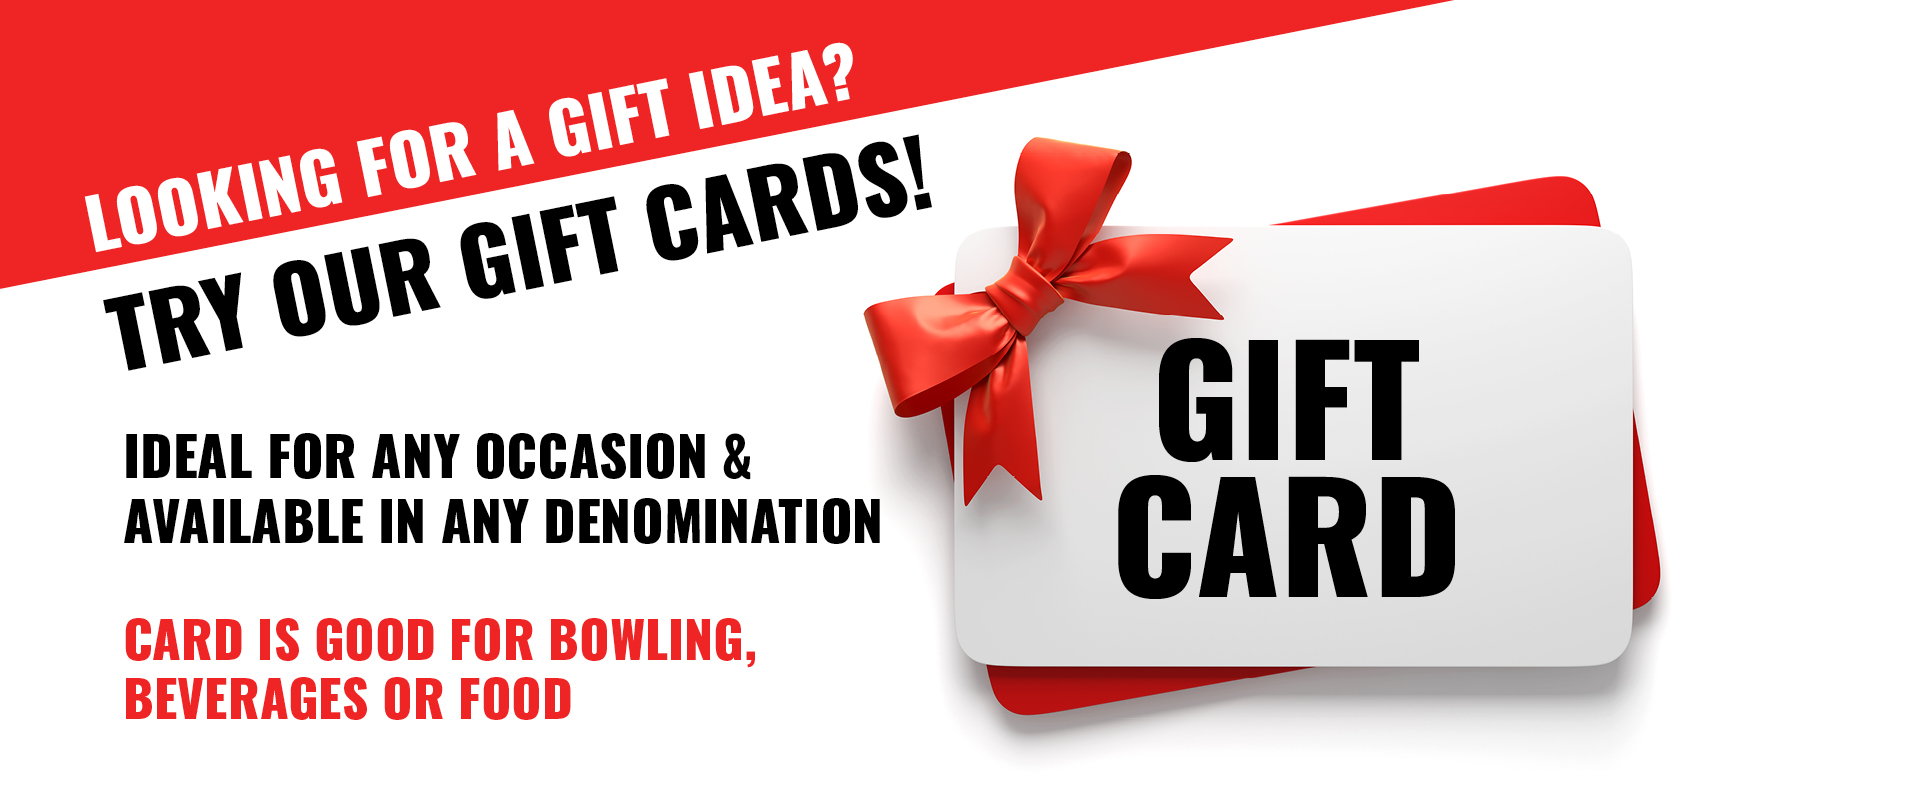 Spartan Bowl Gift Cards